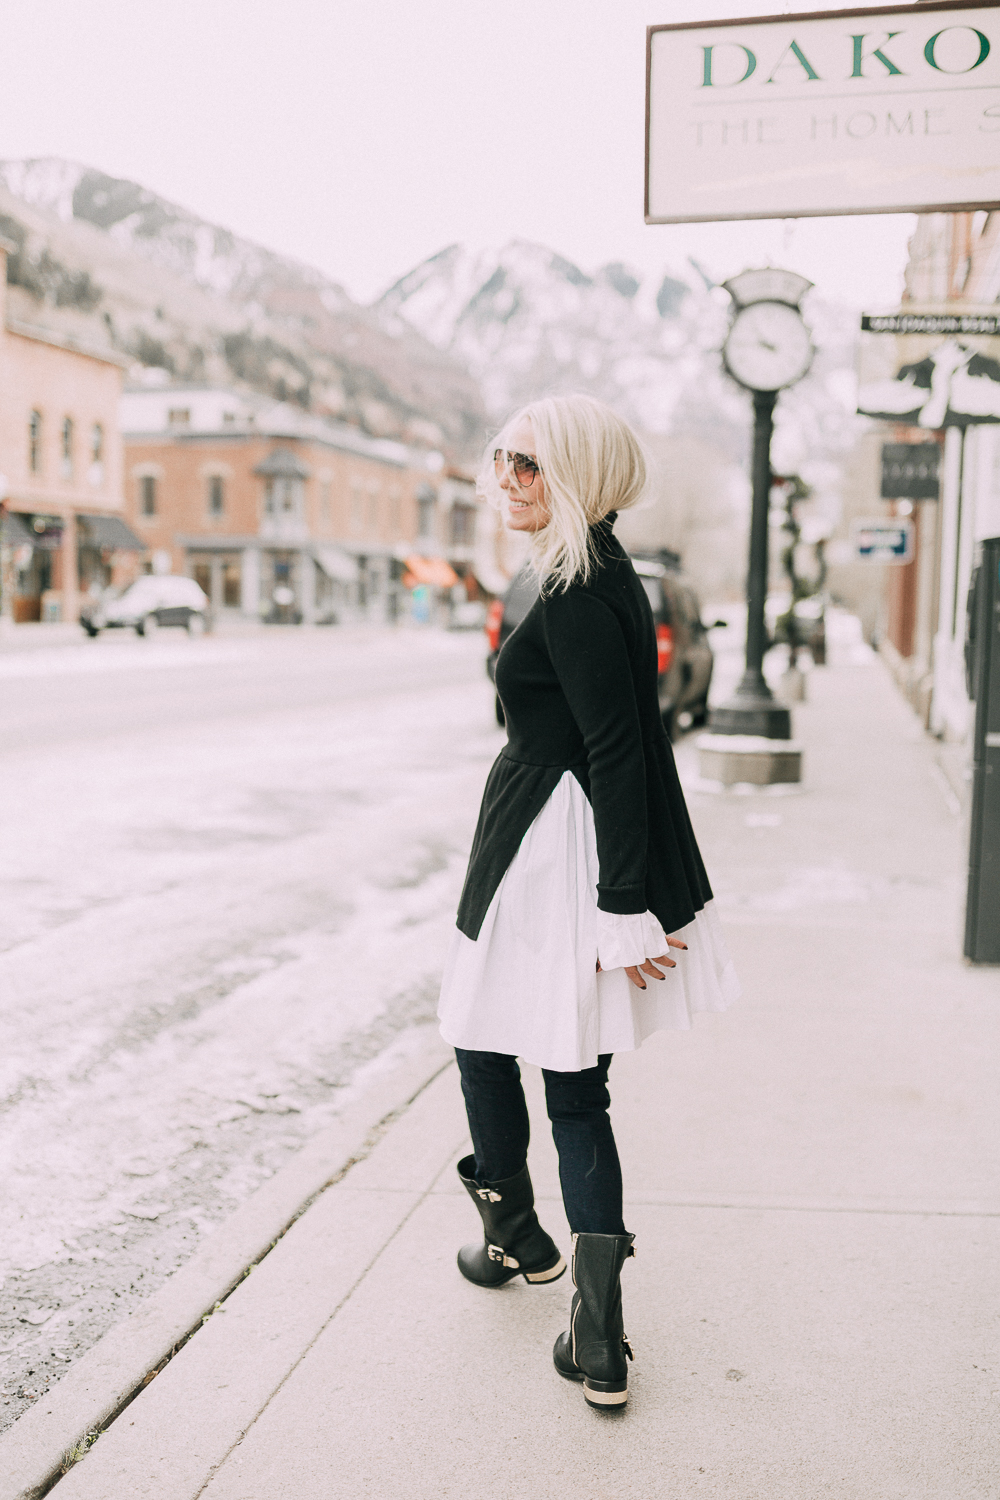 Vince Camuto Sale, Fashion blogger Erin busbee of BusbeeStyle.com carrying the robin tote from Vince Camuto wearing black moto boots and a endless rose sweater dress with dark wash skinny jeans in telluride colorado